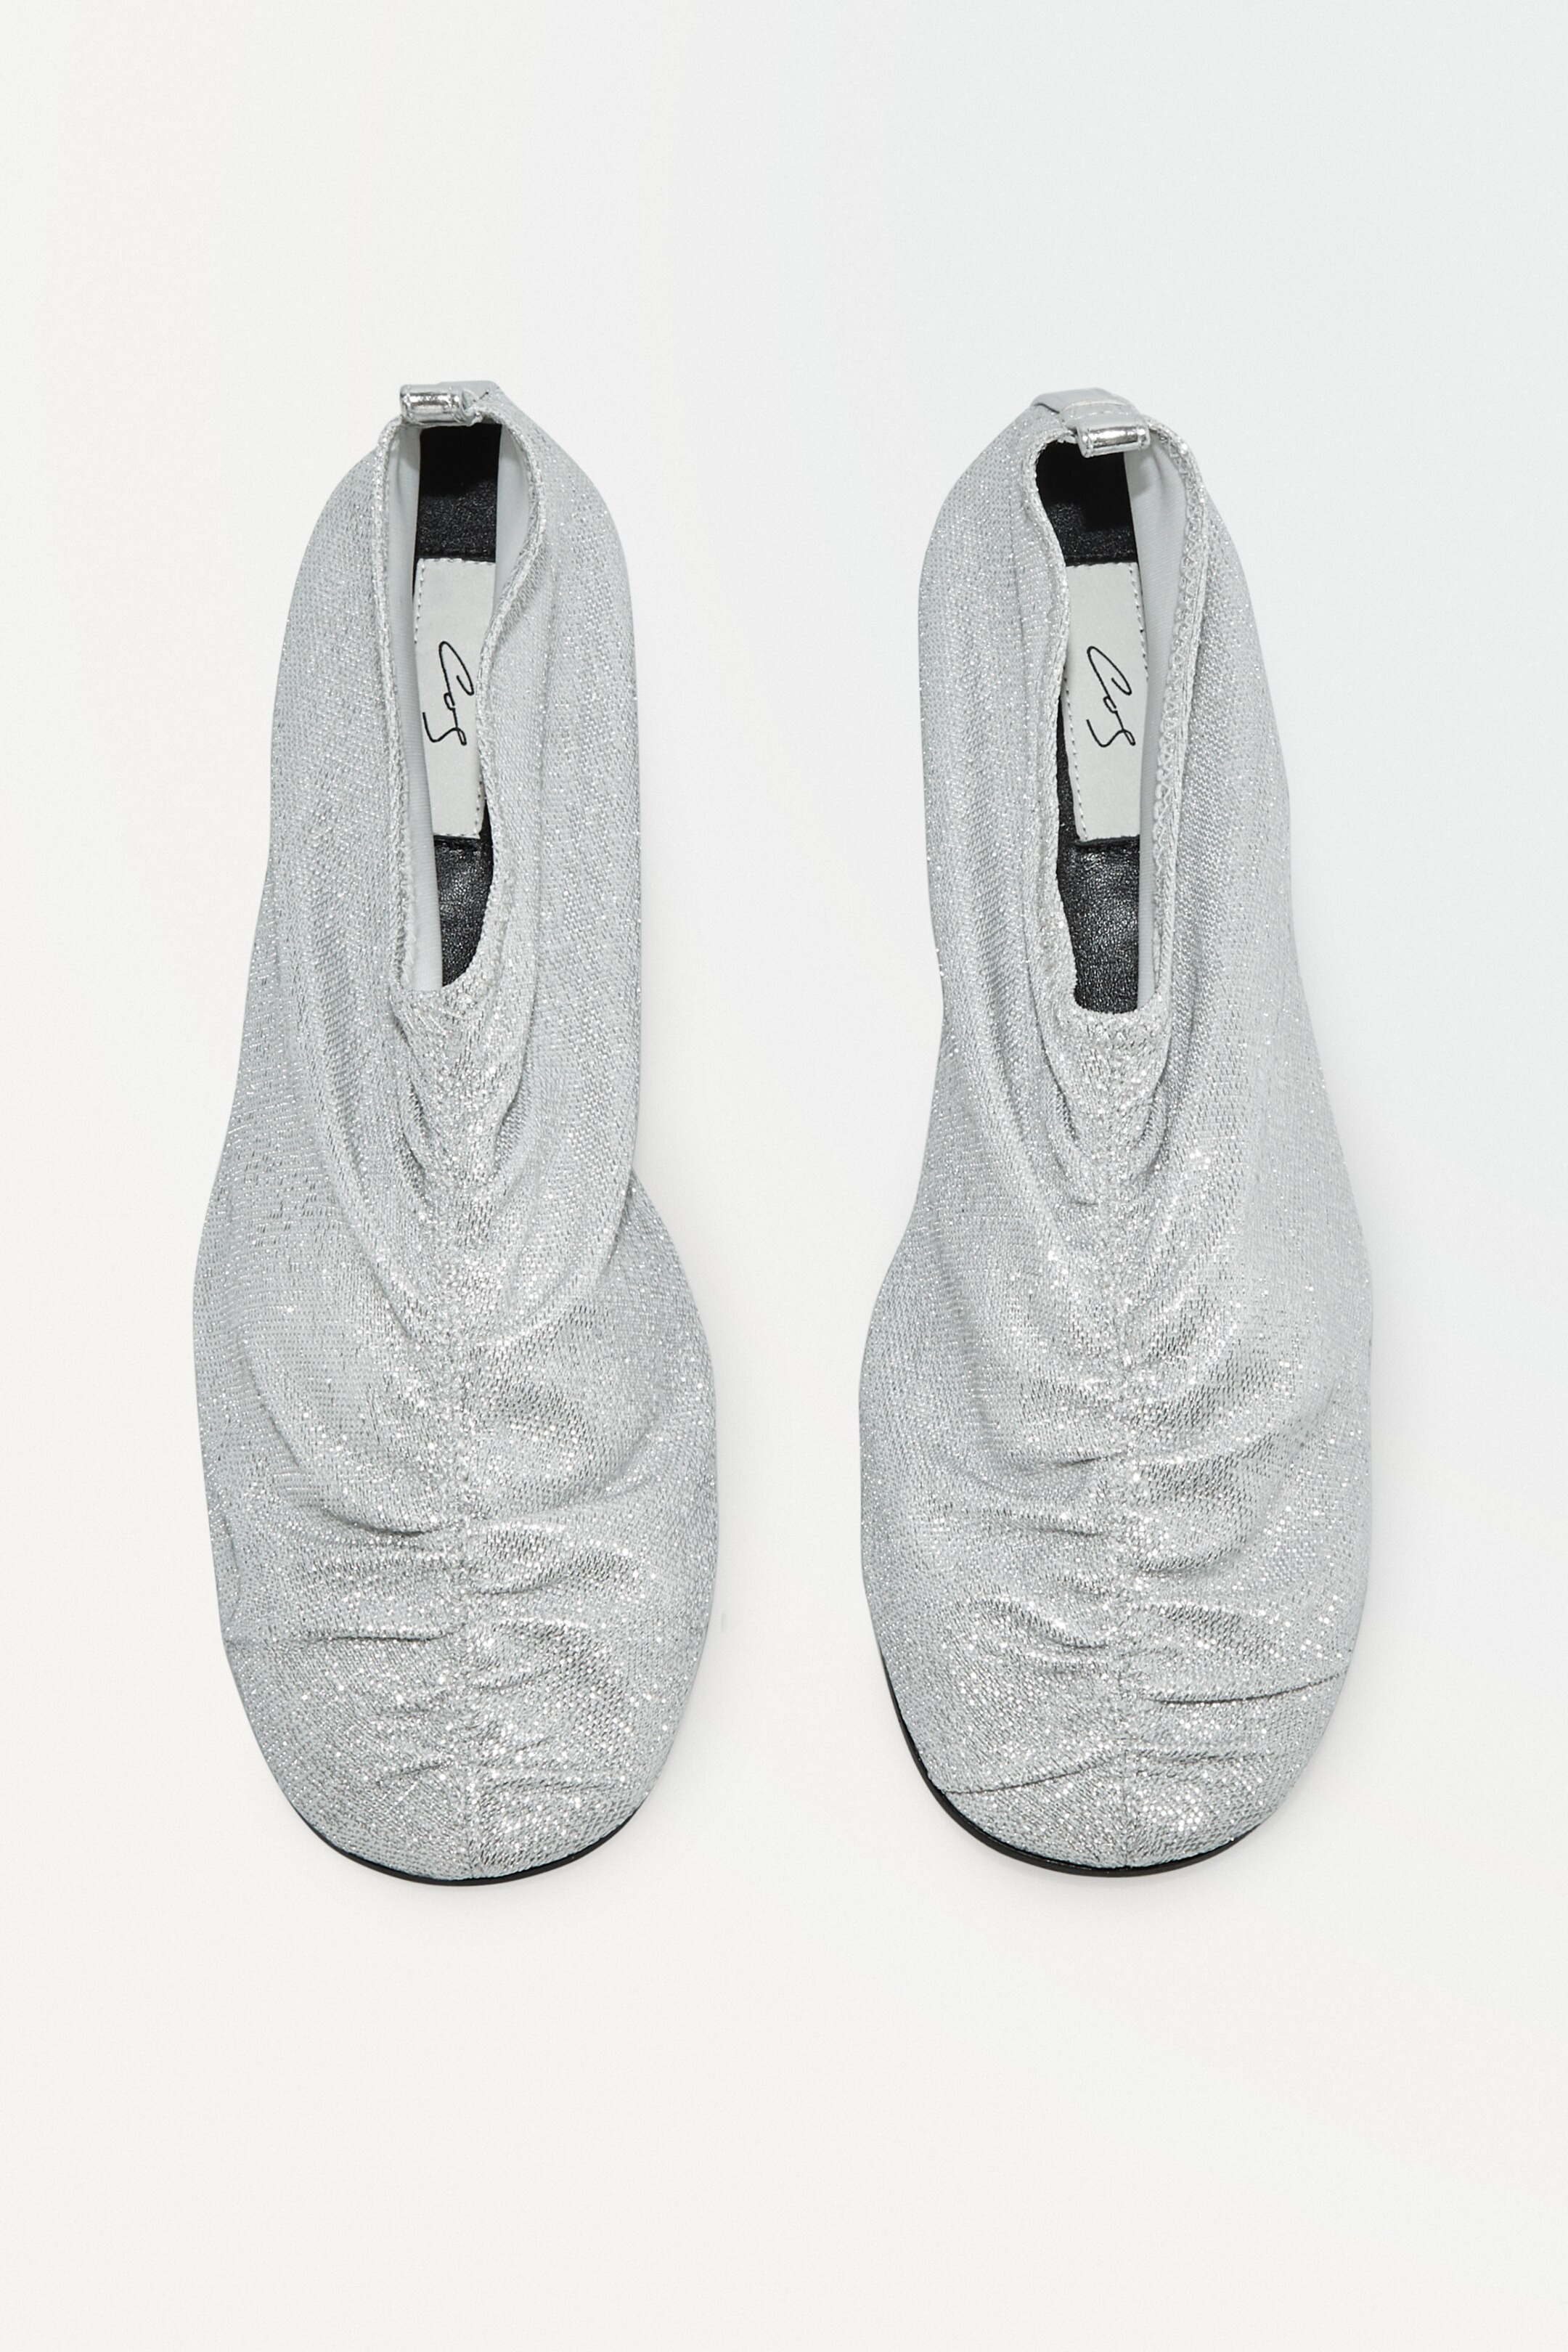 THE METALLIC LOAFERS - SILVER / METALLIC - Shoes - COS